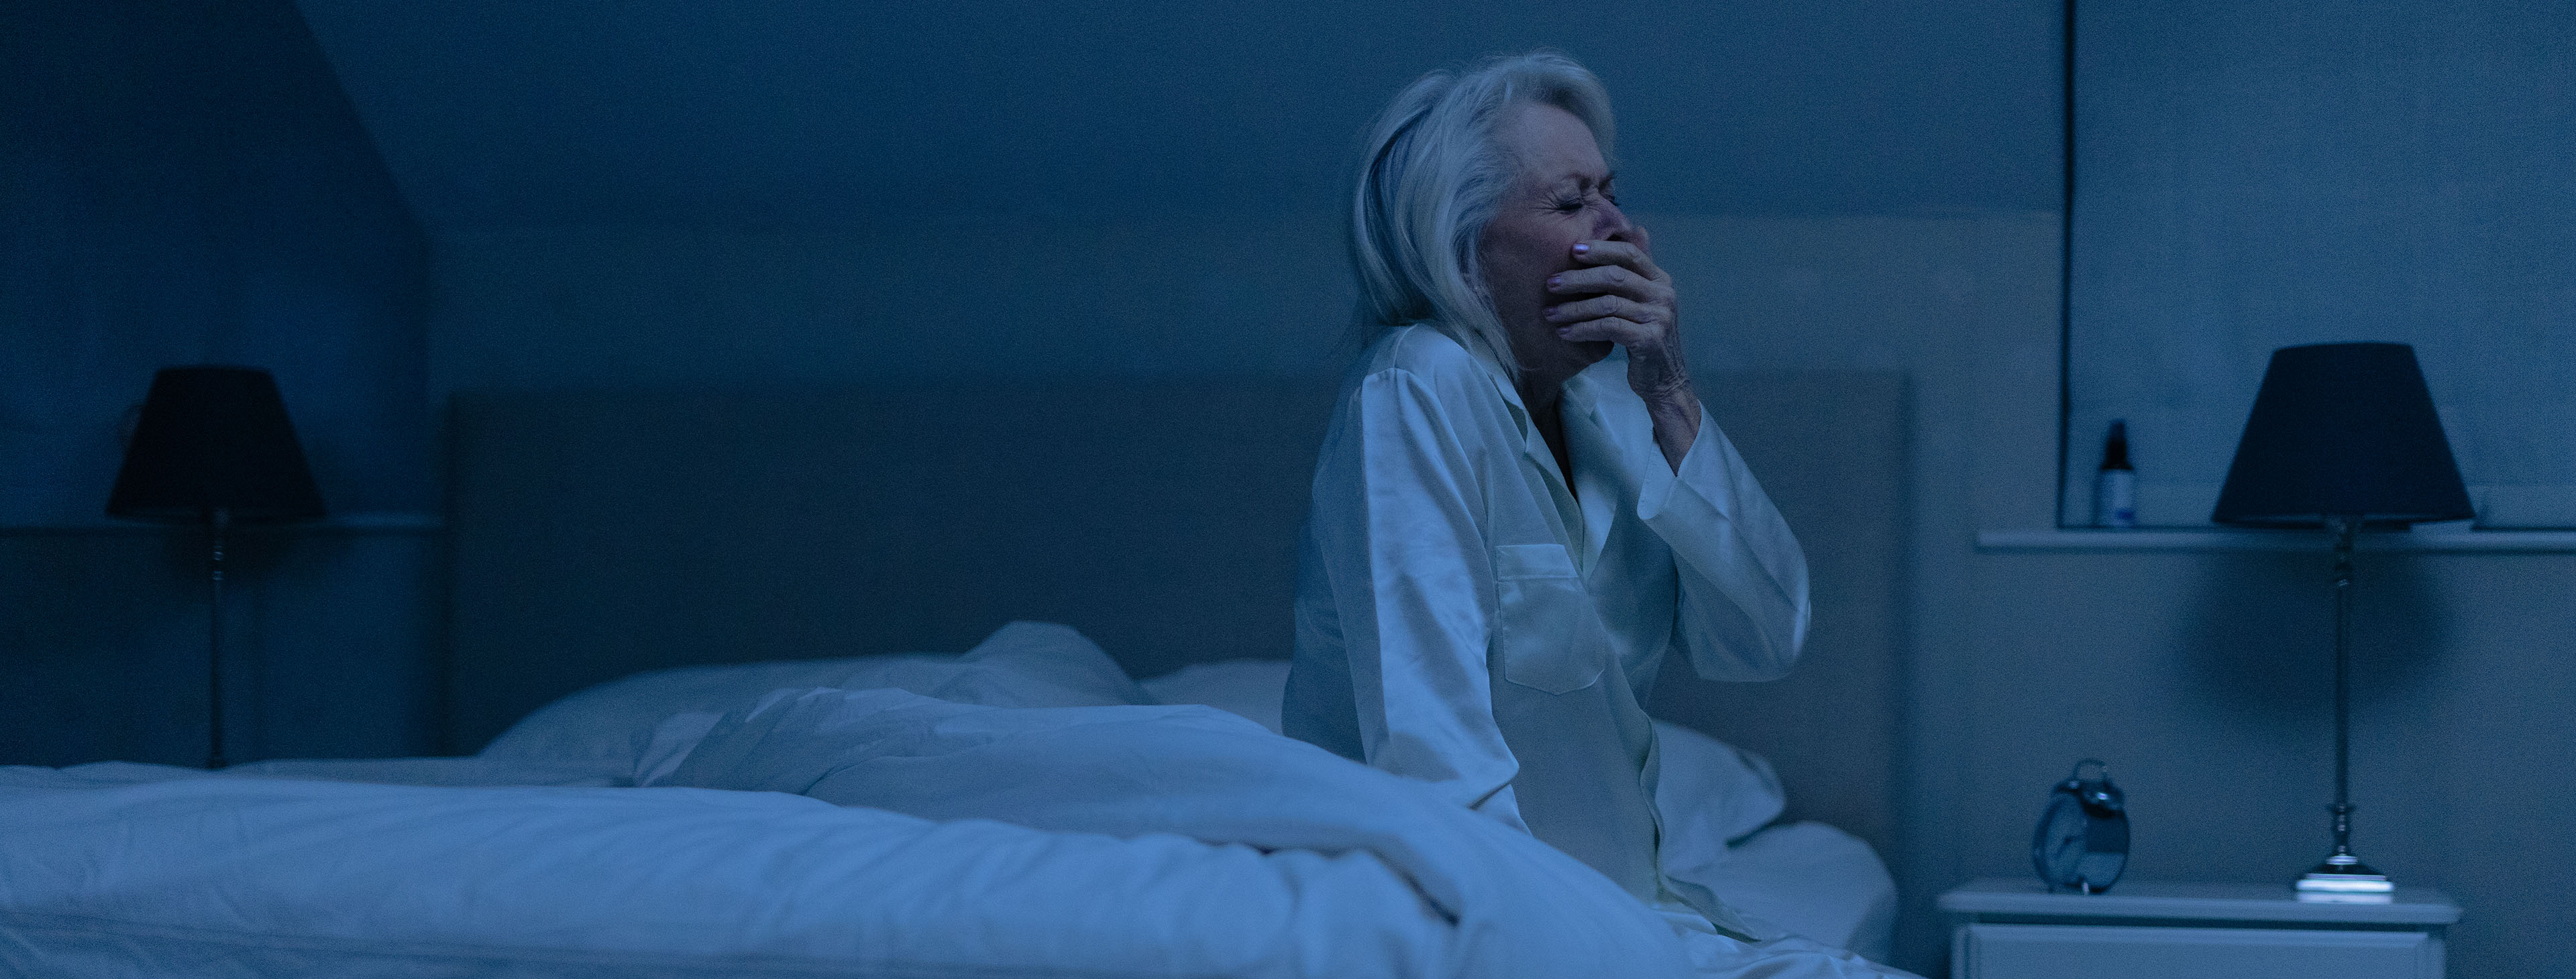 An older lady with COPD struggling to sleep at night